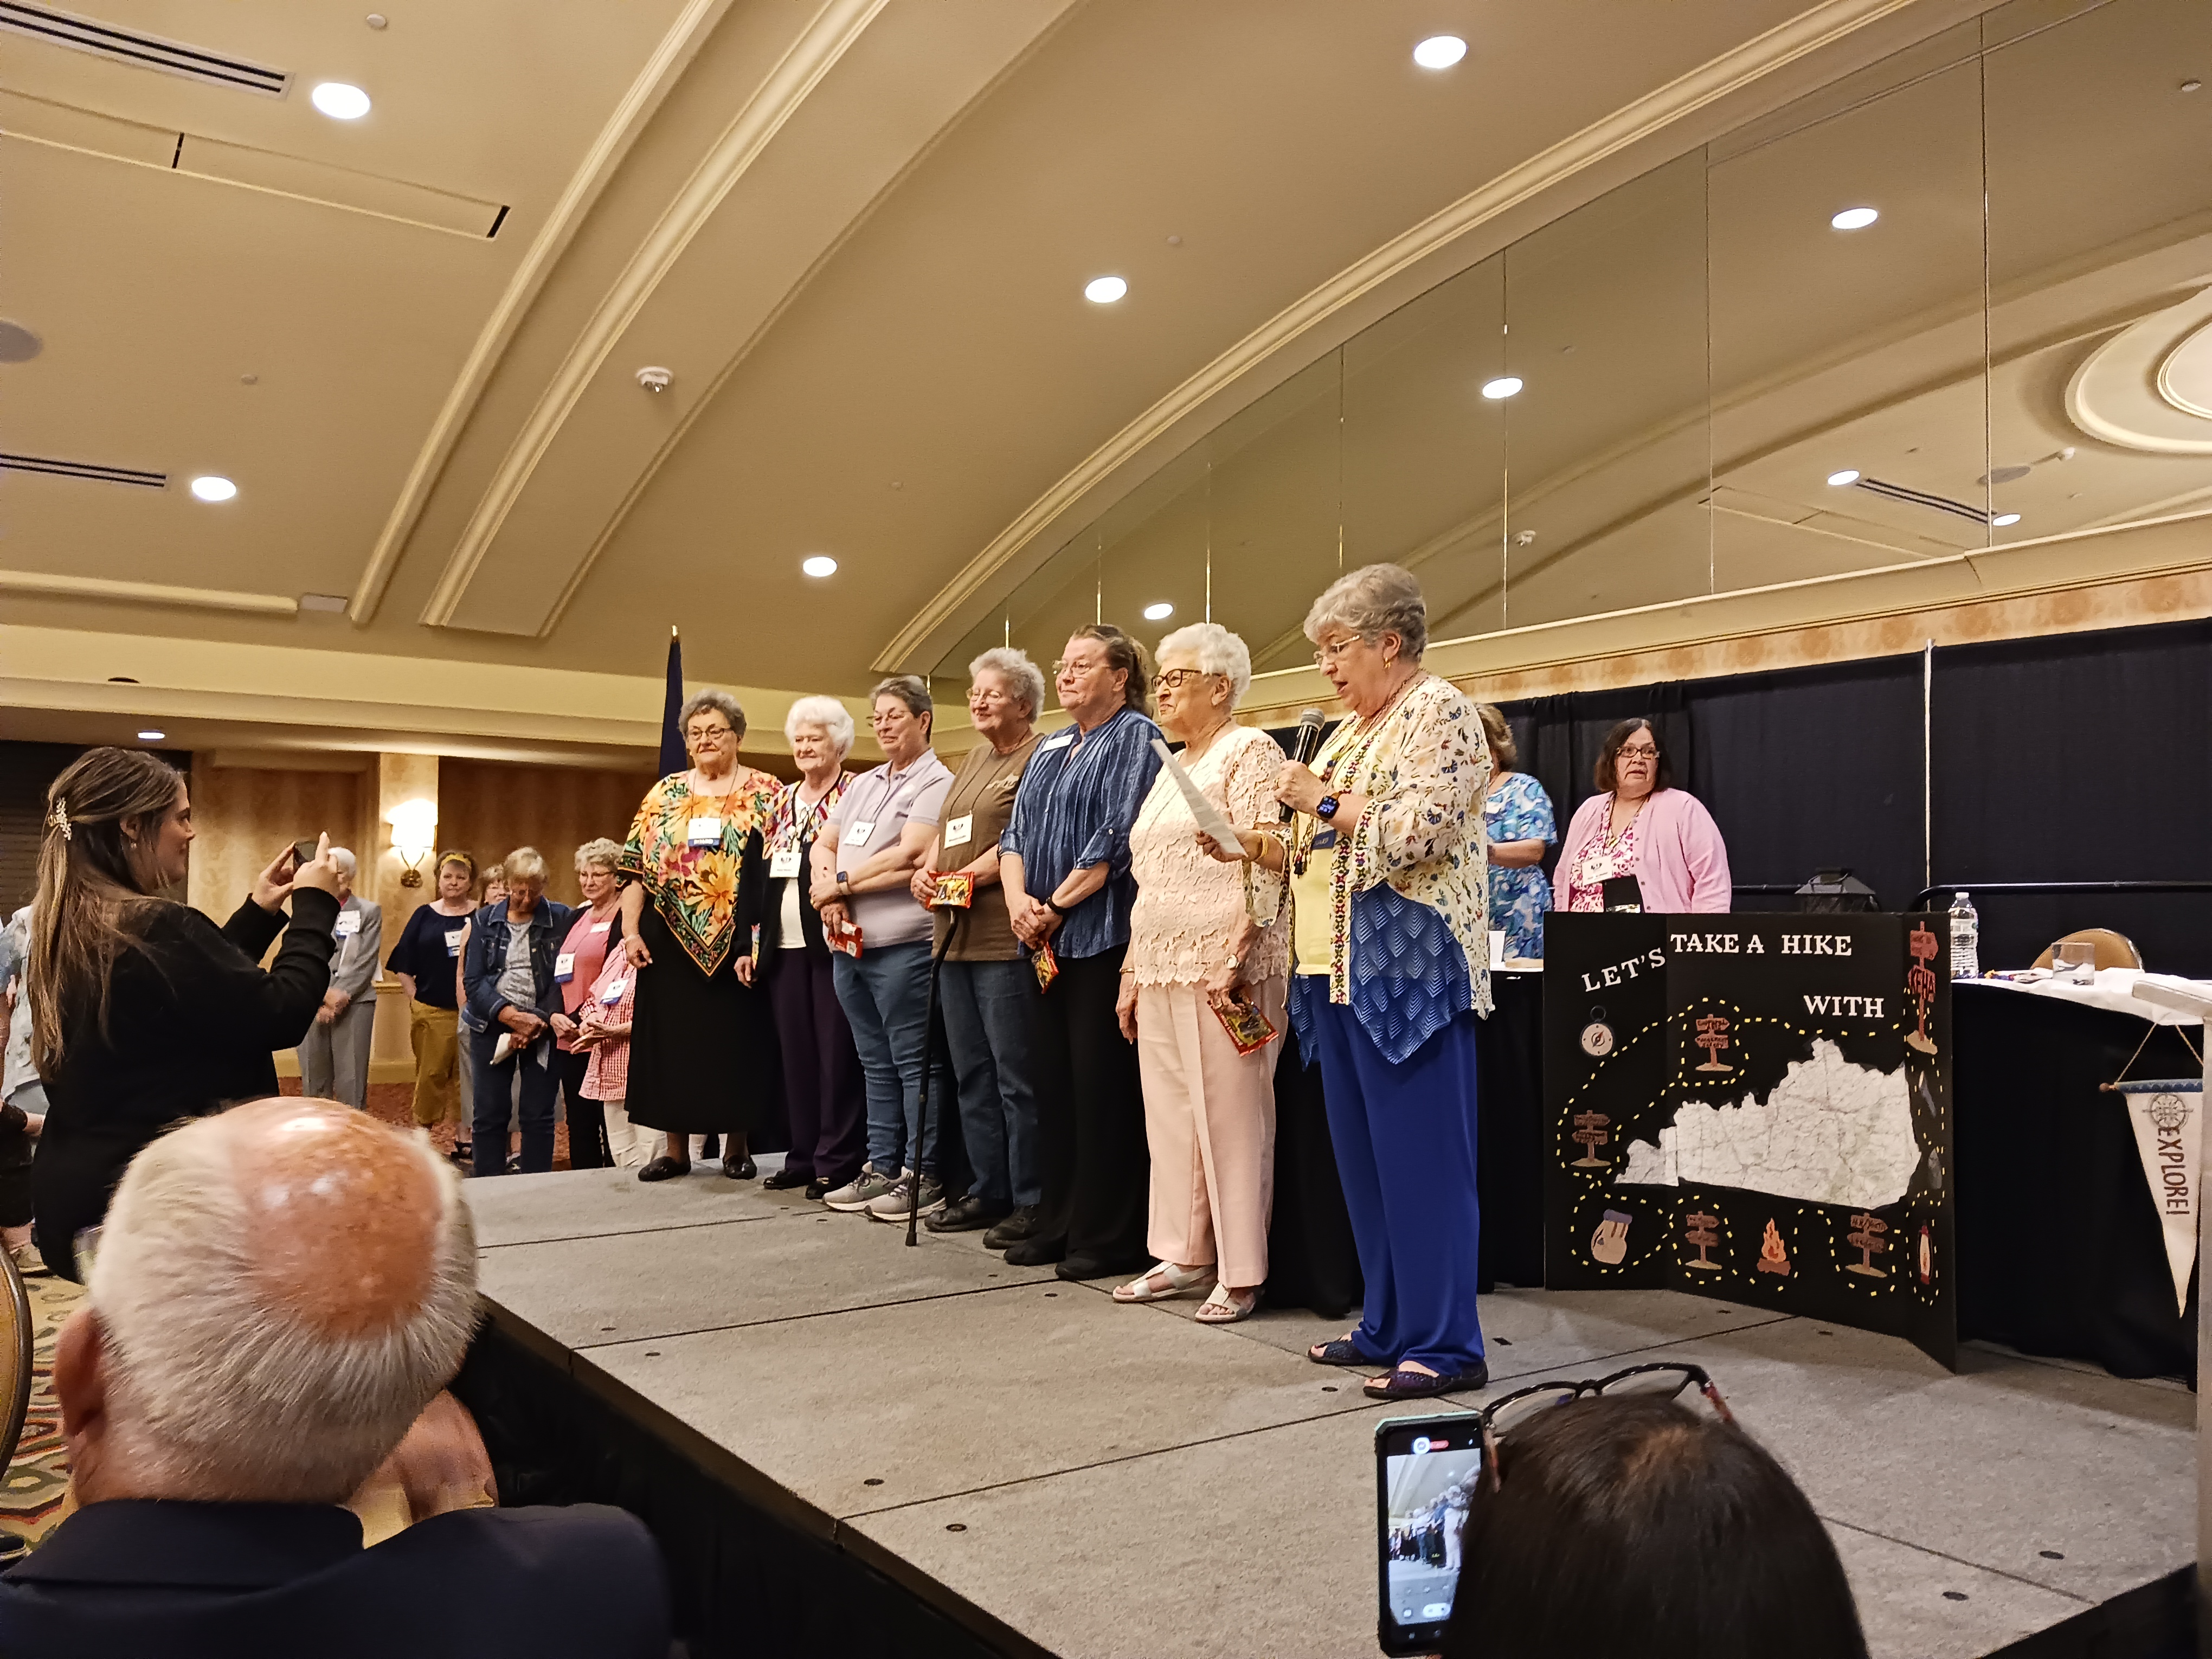 Past president Karen Hill, standing on the right, installed the KEHA officers who were elected during the 2023 KEHA State Meeting business meeting. Their new terms begin July 1.